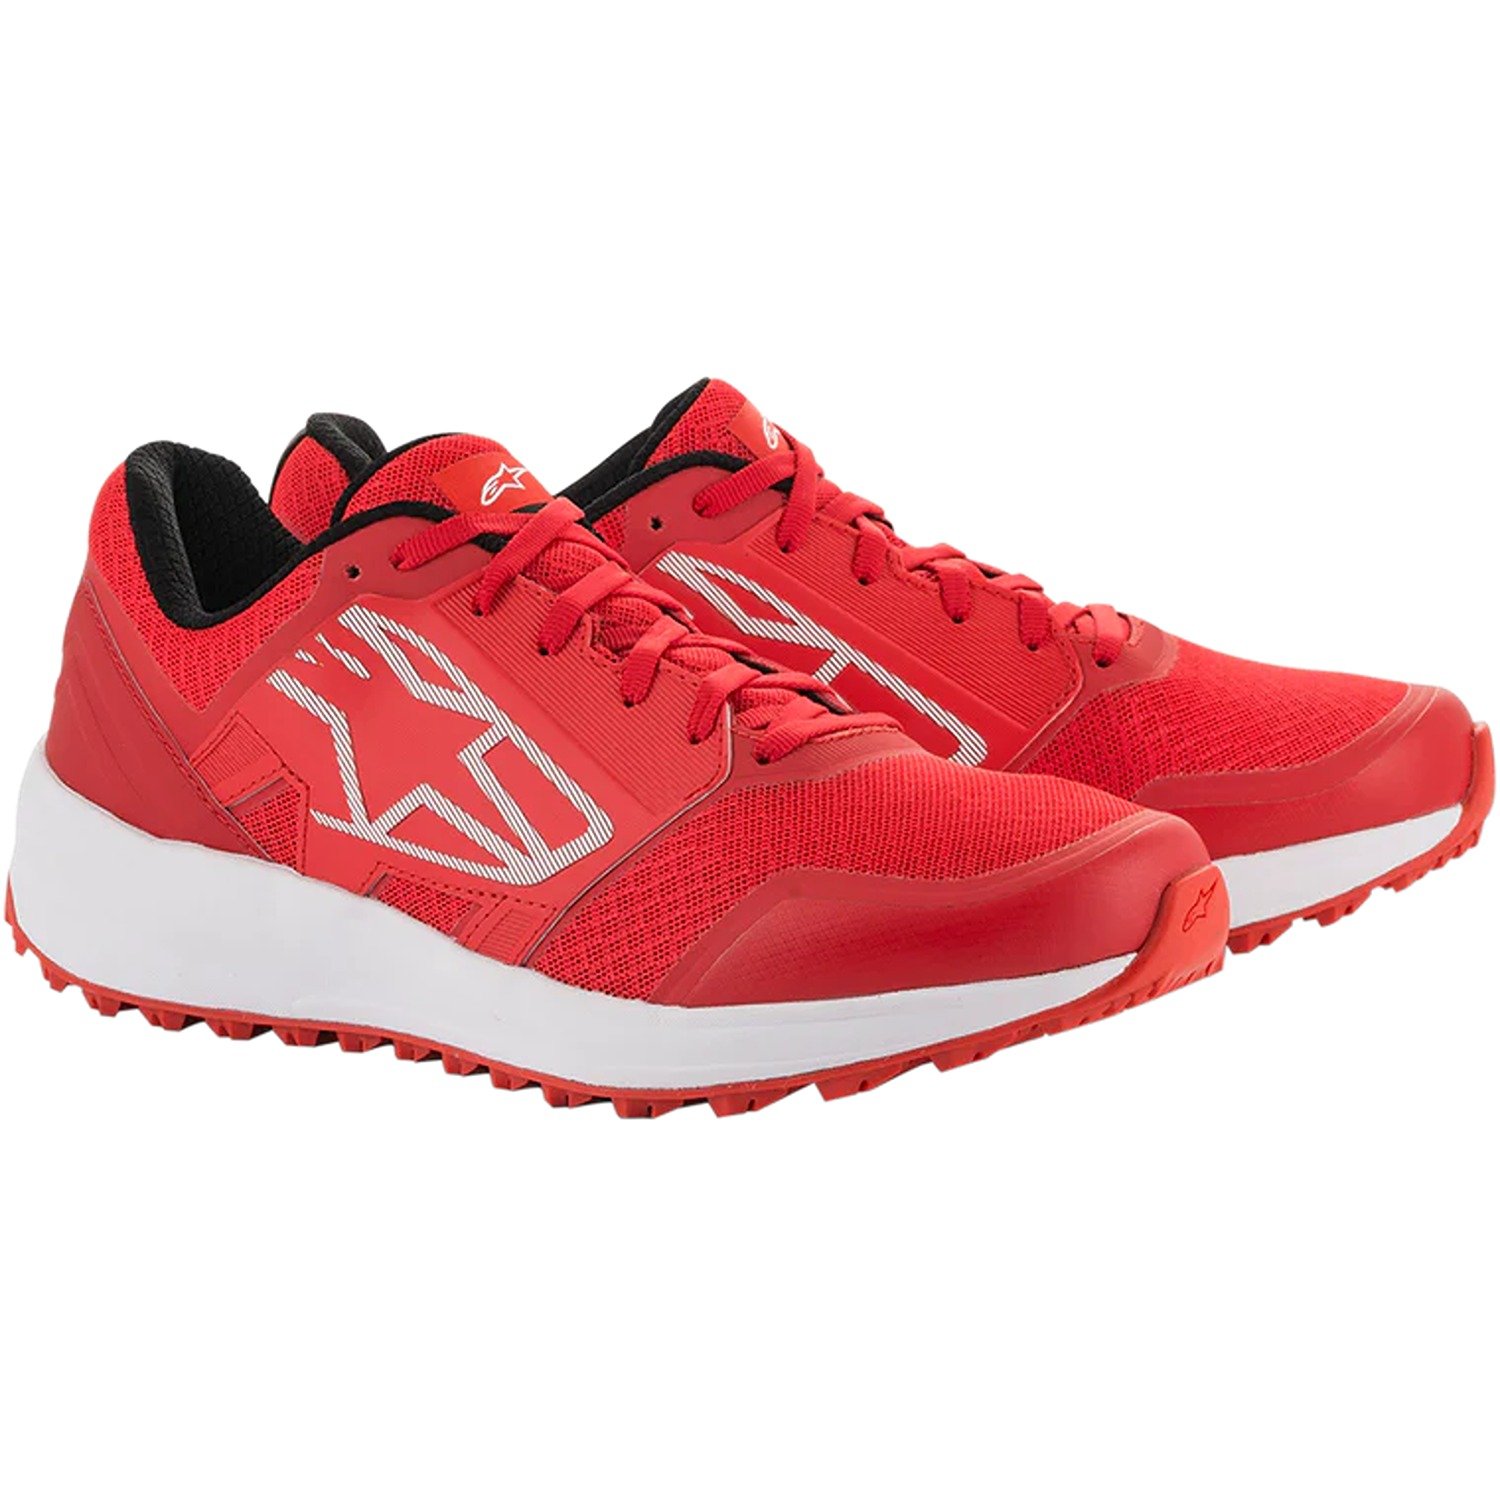 Image of Alpinestars Meta Trail Shoes Red White Size US 115 ID 8059175092152